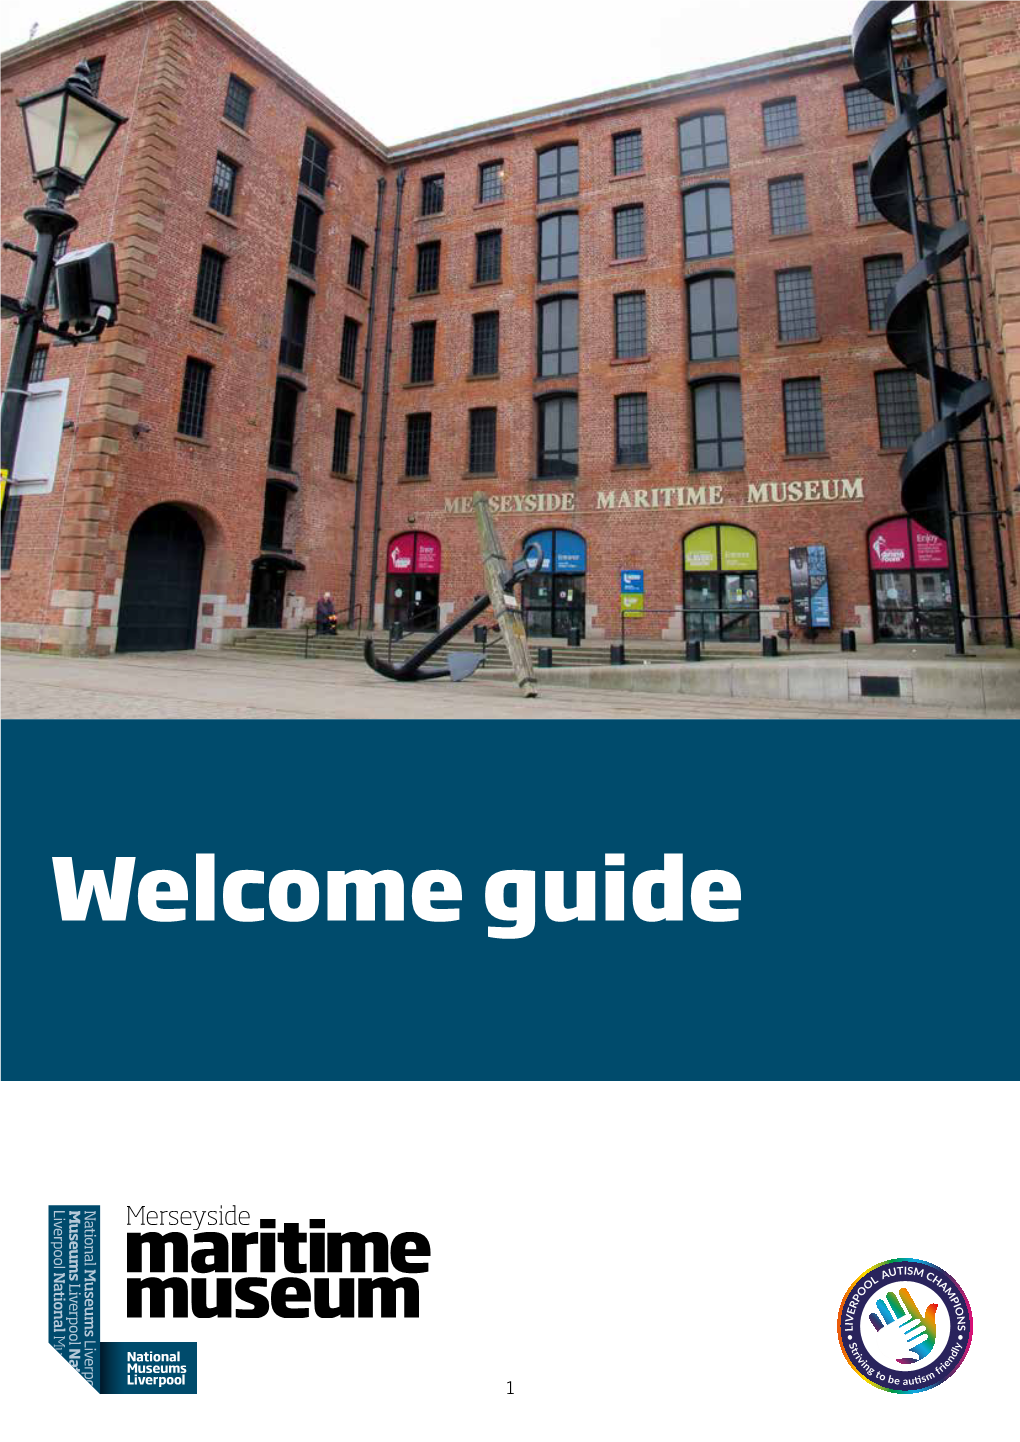 Guide to Merseyside Maritime Museum and the International